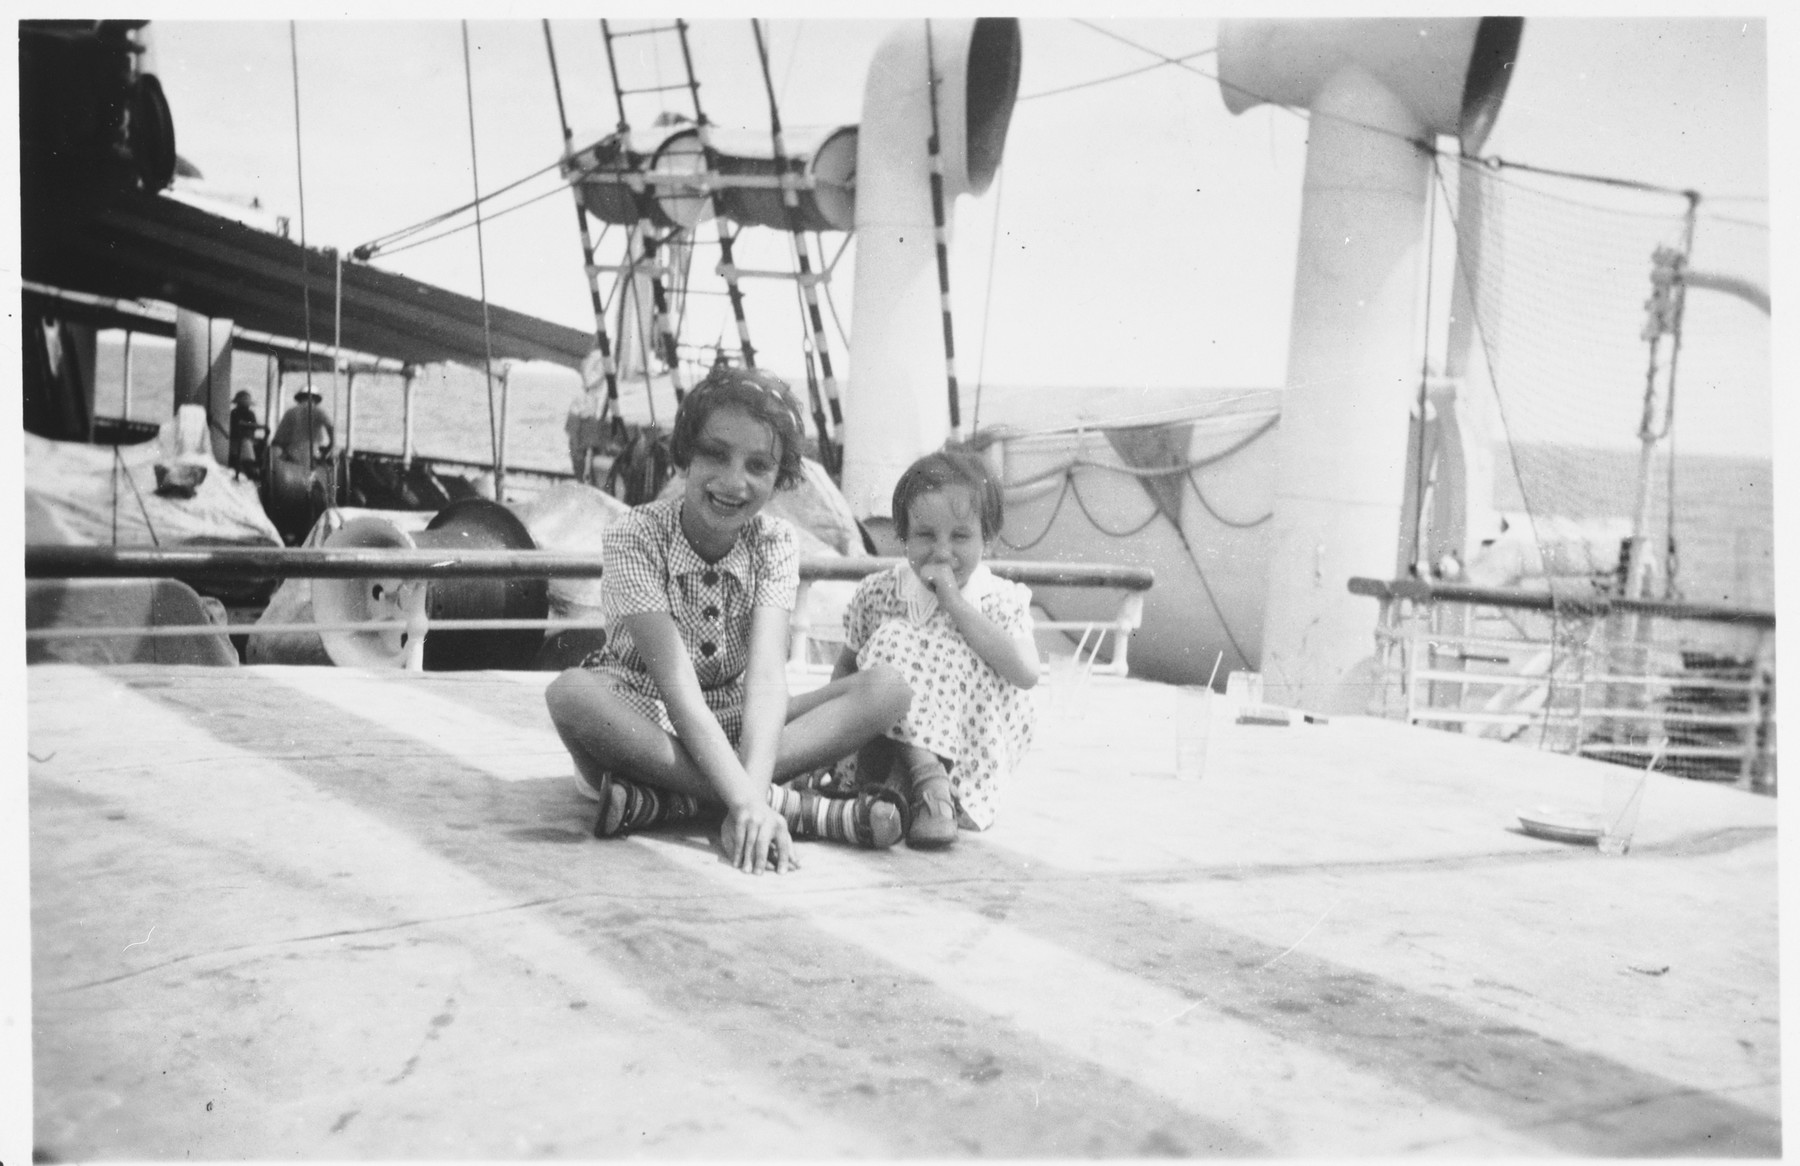 Two Jewish refugee children sit on the deck of the Usambara while en route to Africa. 

Pictured are Gisela (right) and Inge Berg (left).